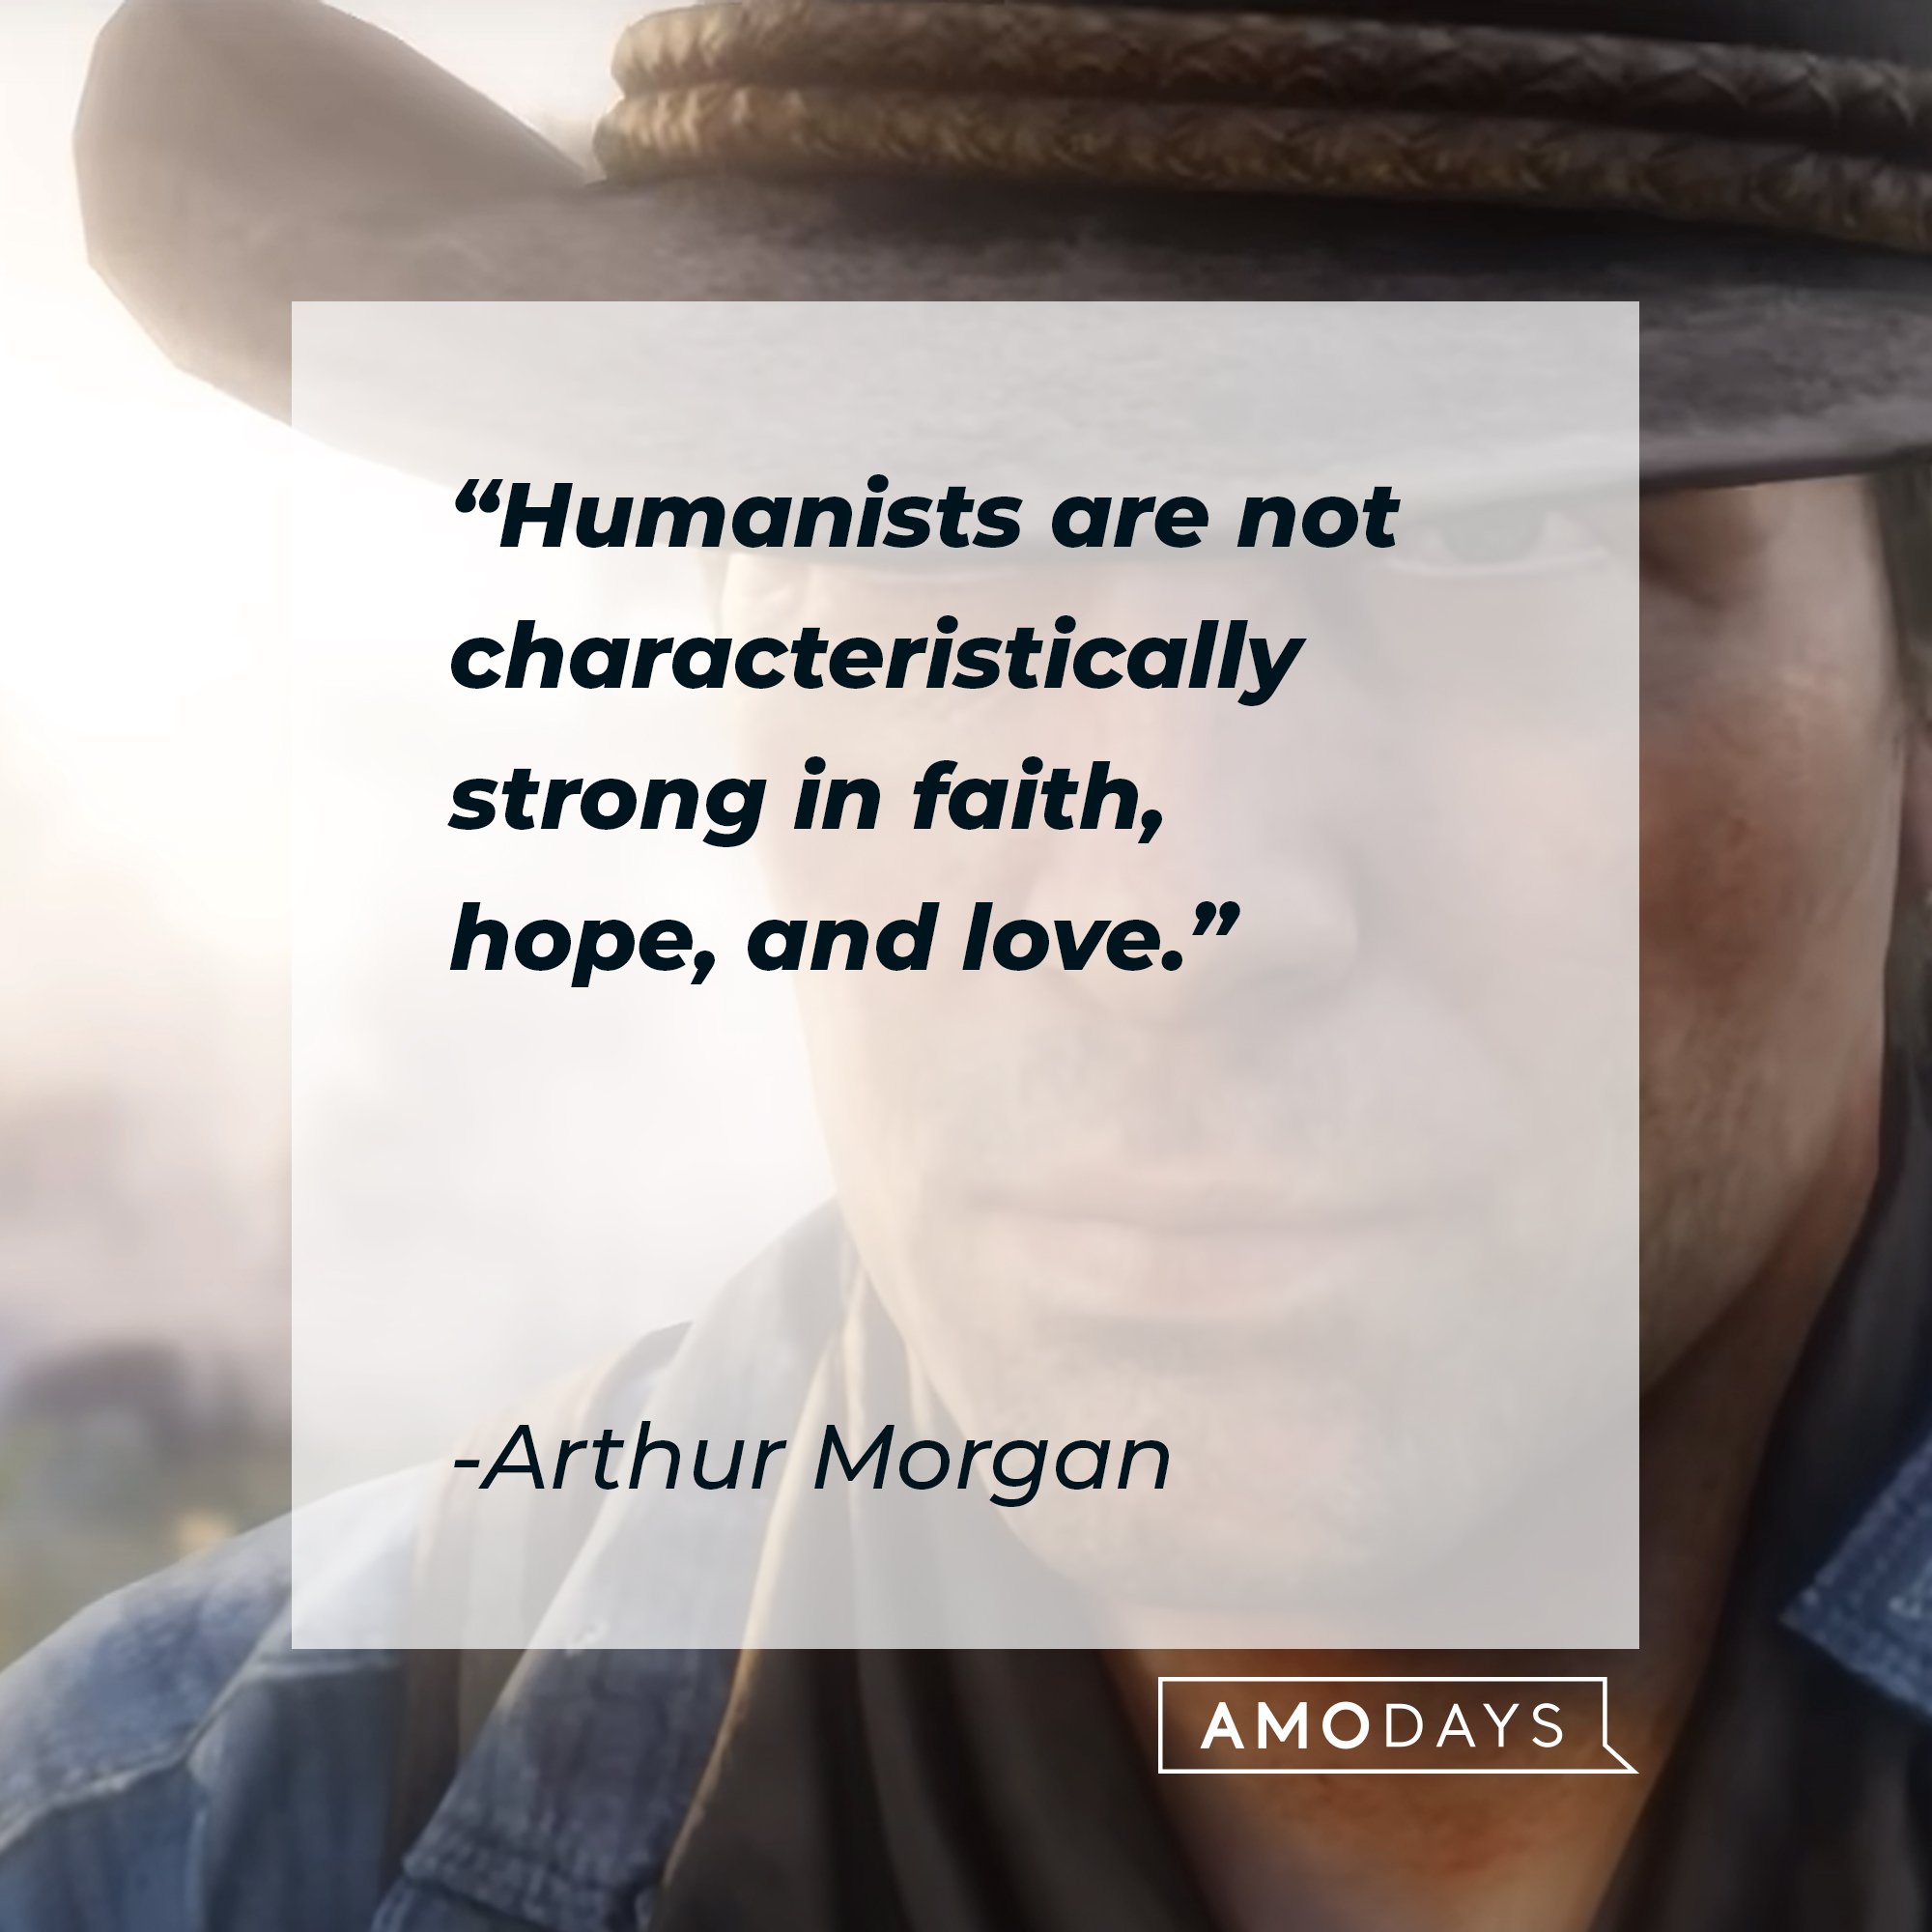 Arthur Morgan's quote: "Humanists are not characteristically strong in faith, hope, and love." | Image: AmoDays